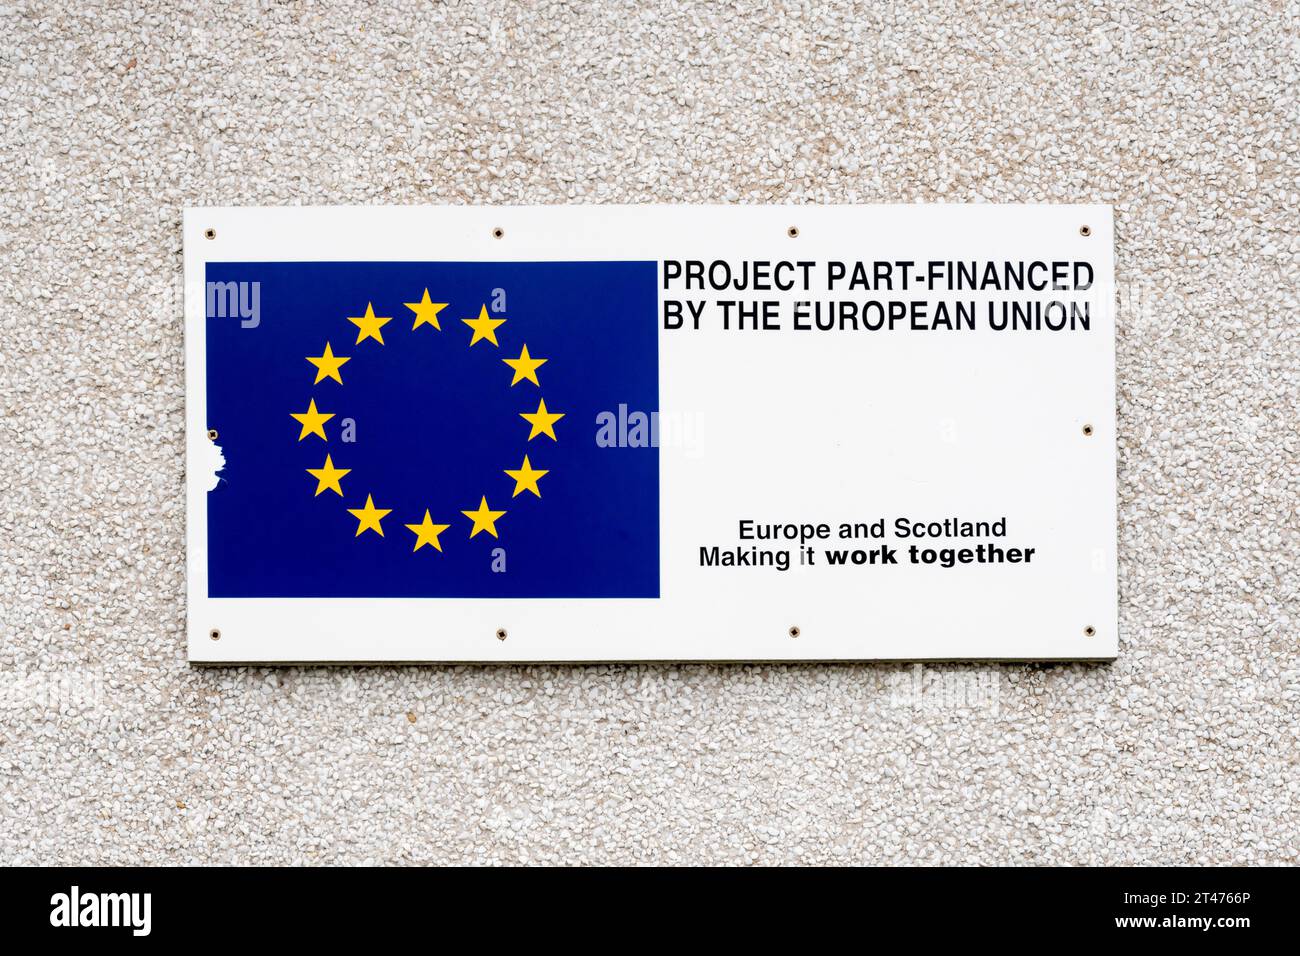 Gratitude plaque sign reading Project Part-Financed by the EU, Europe & Scotland Making It Work Together on Fetlar pier in Shetland. Stock Photo